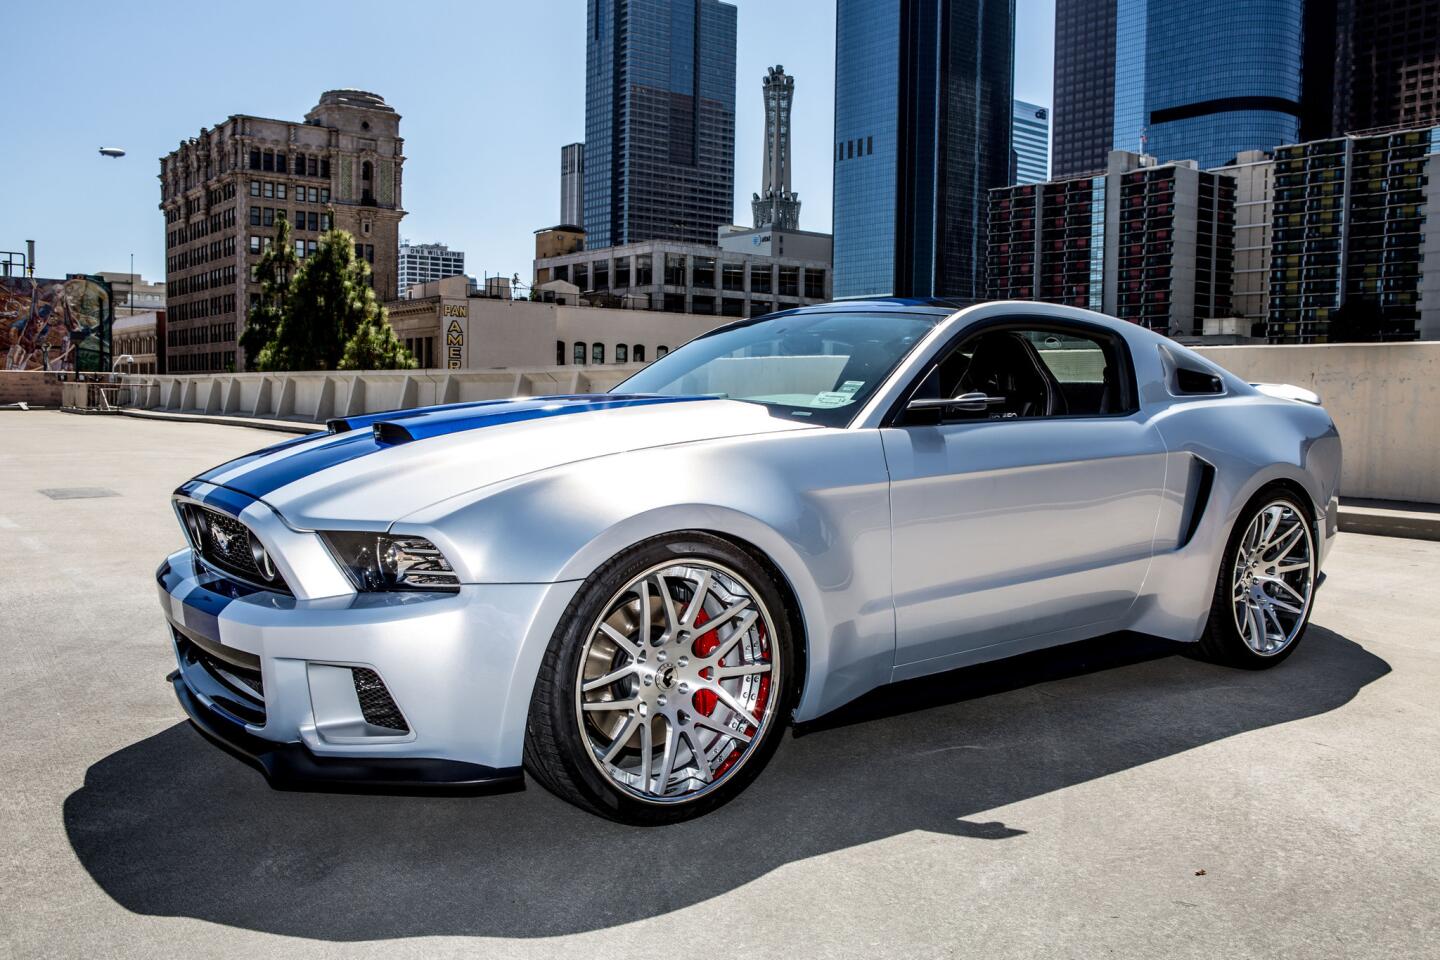 'Need for Speed' Mustang